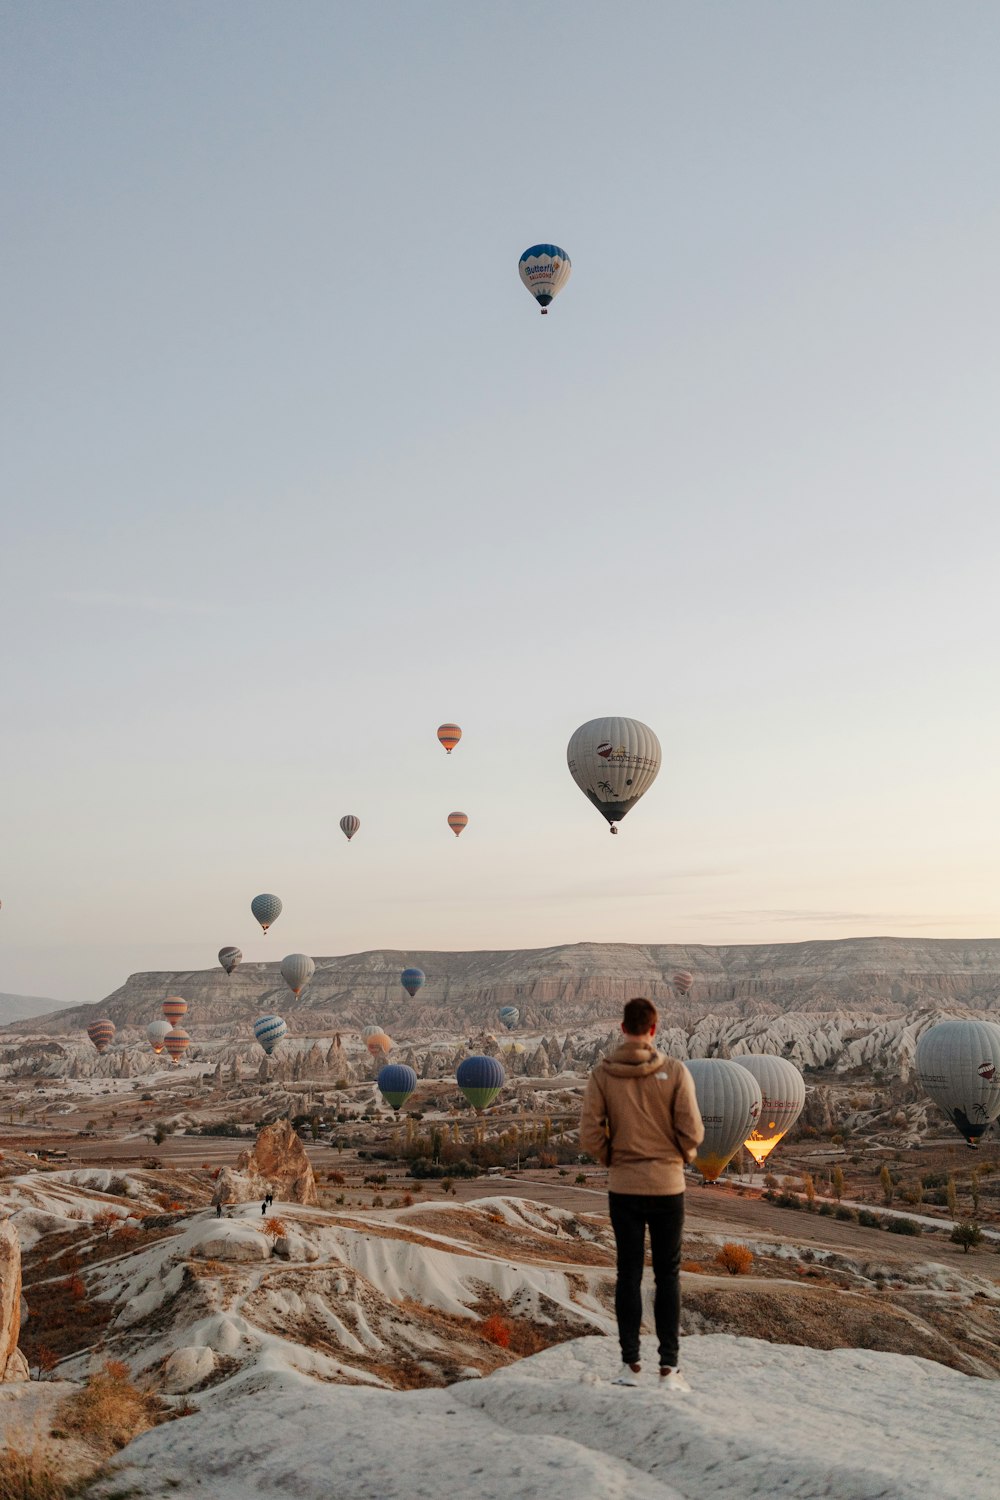 a person standing on a hill with hot air balloons in the air